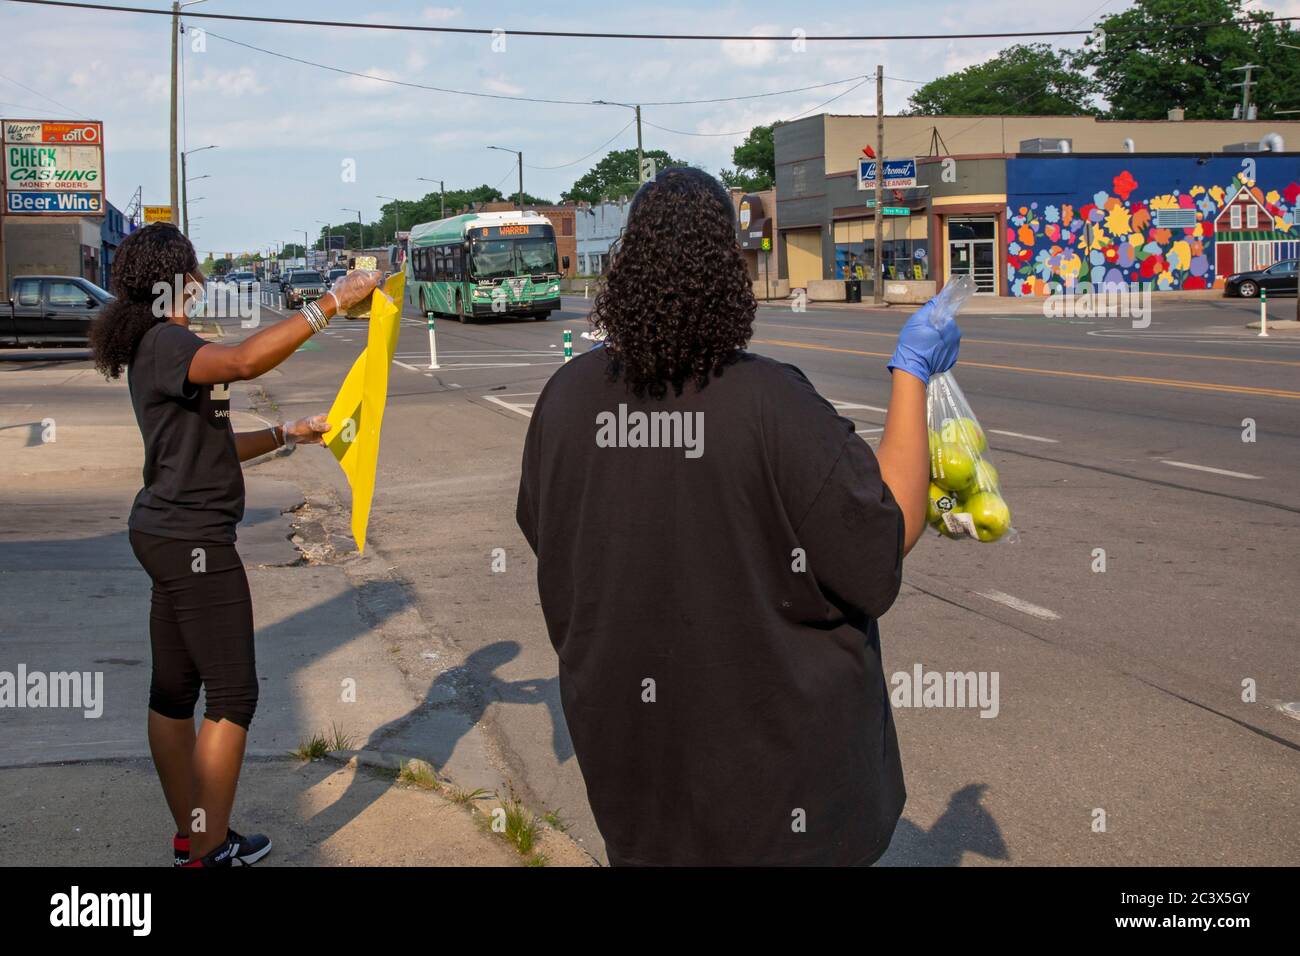 Detroit, Michigan - Members of Saved by Grace Christian Ministries hand out free fruit and vegetables in front of their church during the coronavirus Stock Photo